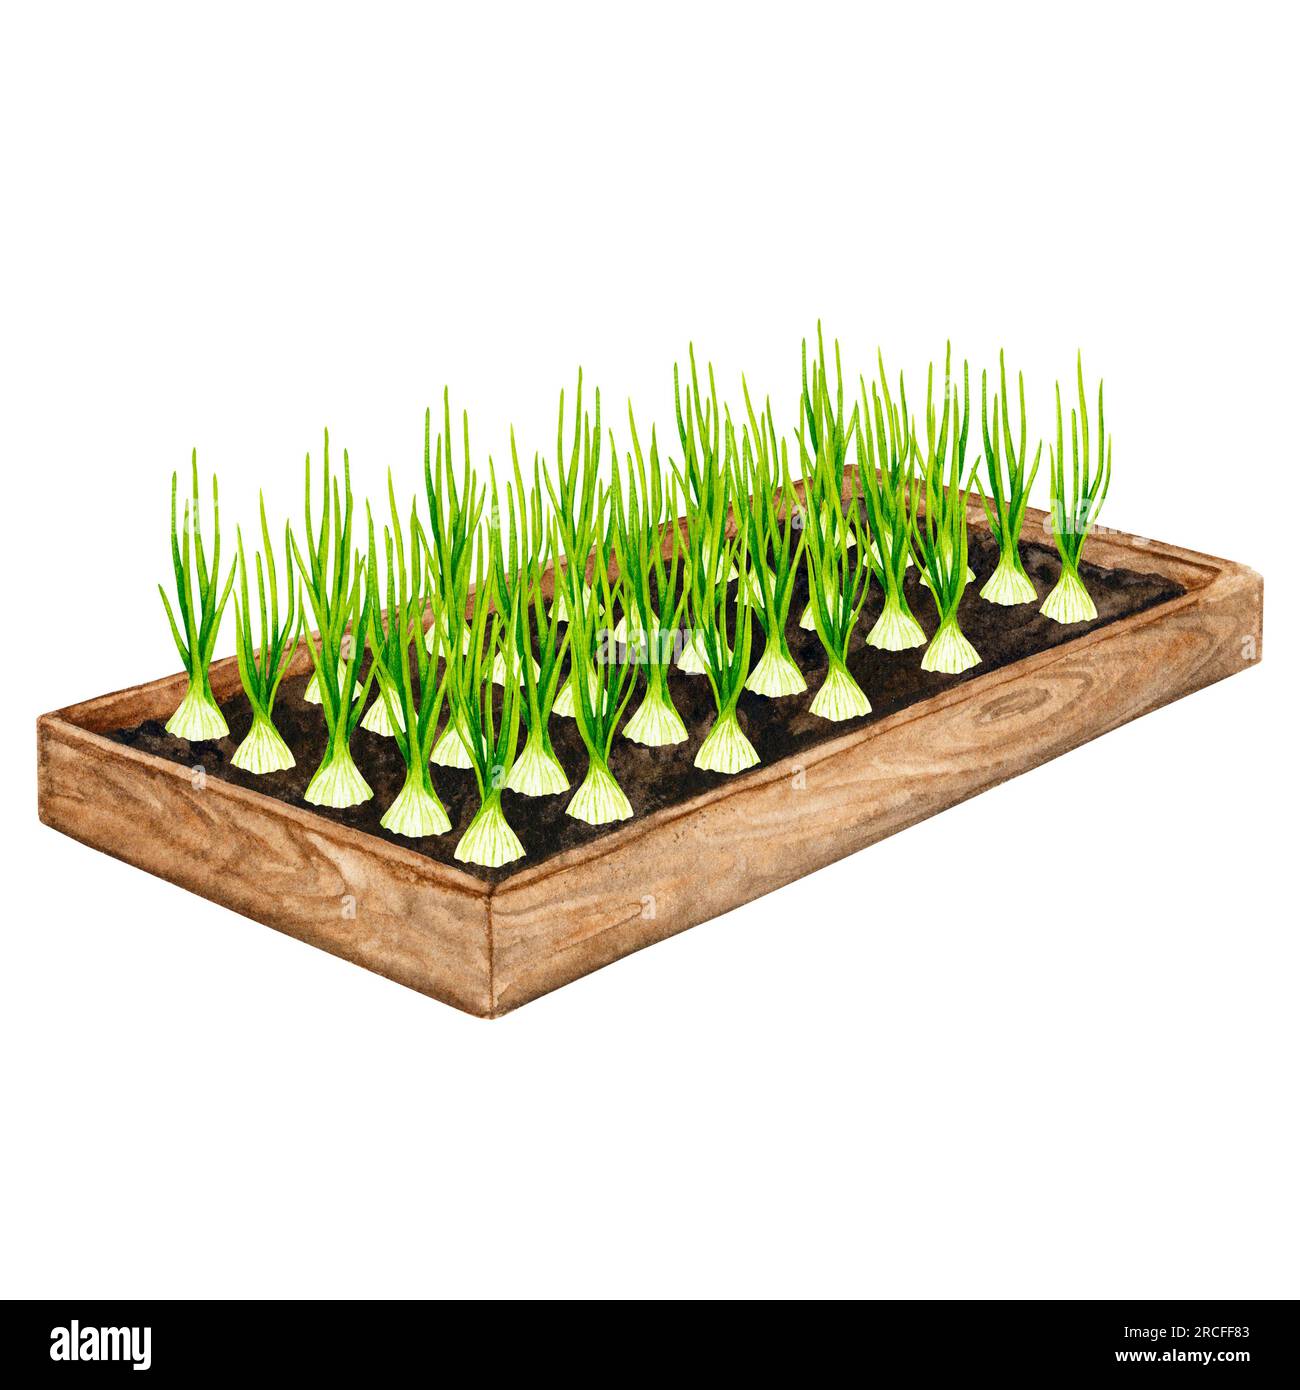 Wooden garden bed with growing onions. Watercolor element on the theme of gardening, spring seedlings, growing vegetables. Stock Photo